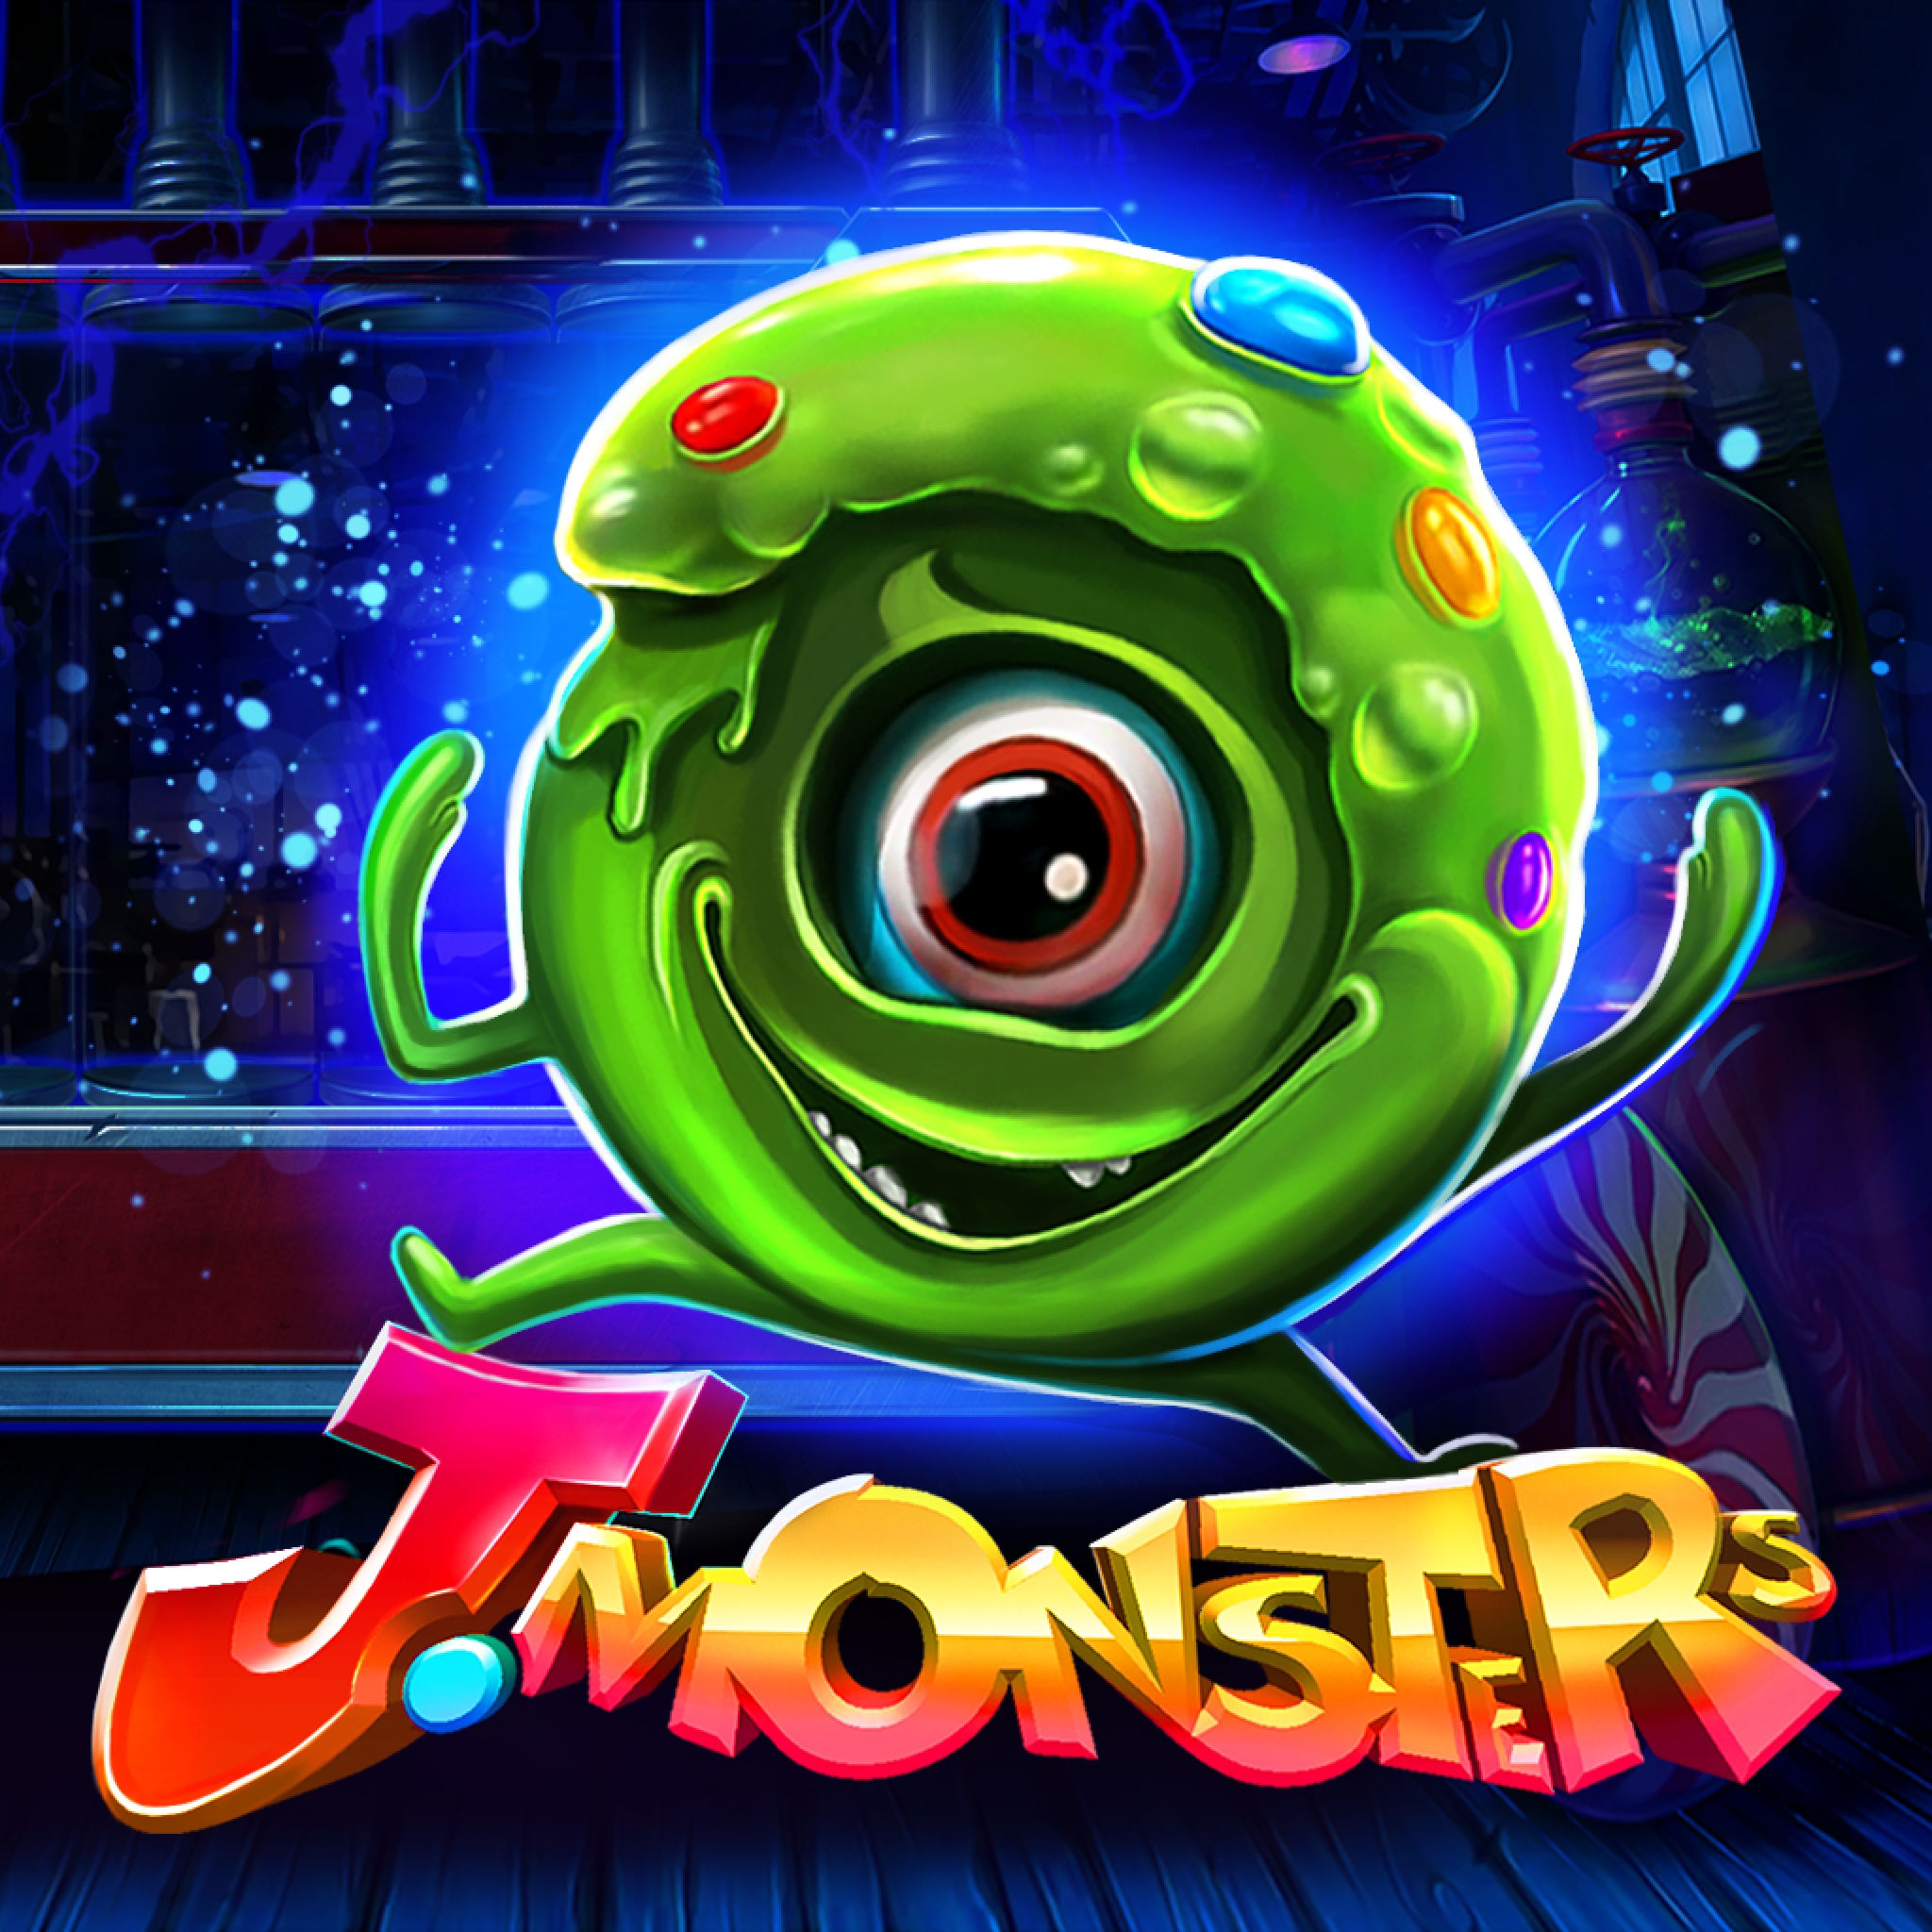 The J. Monsters Online Slot Demo Game by Belatra Games